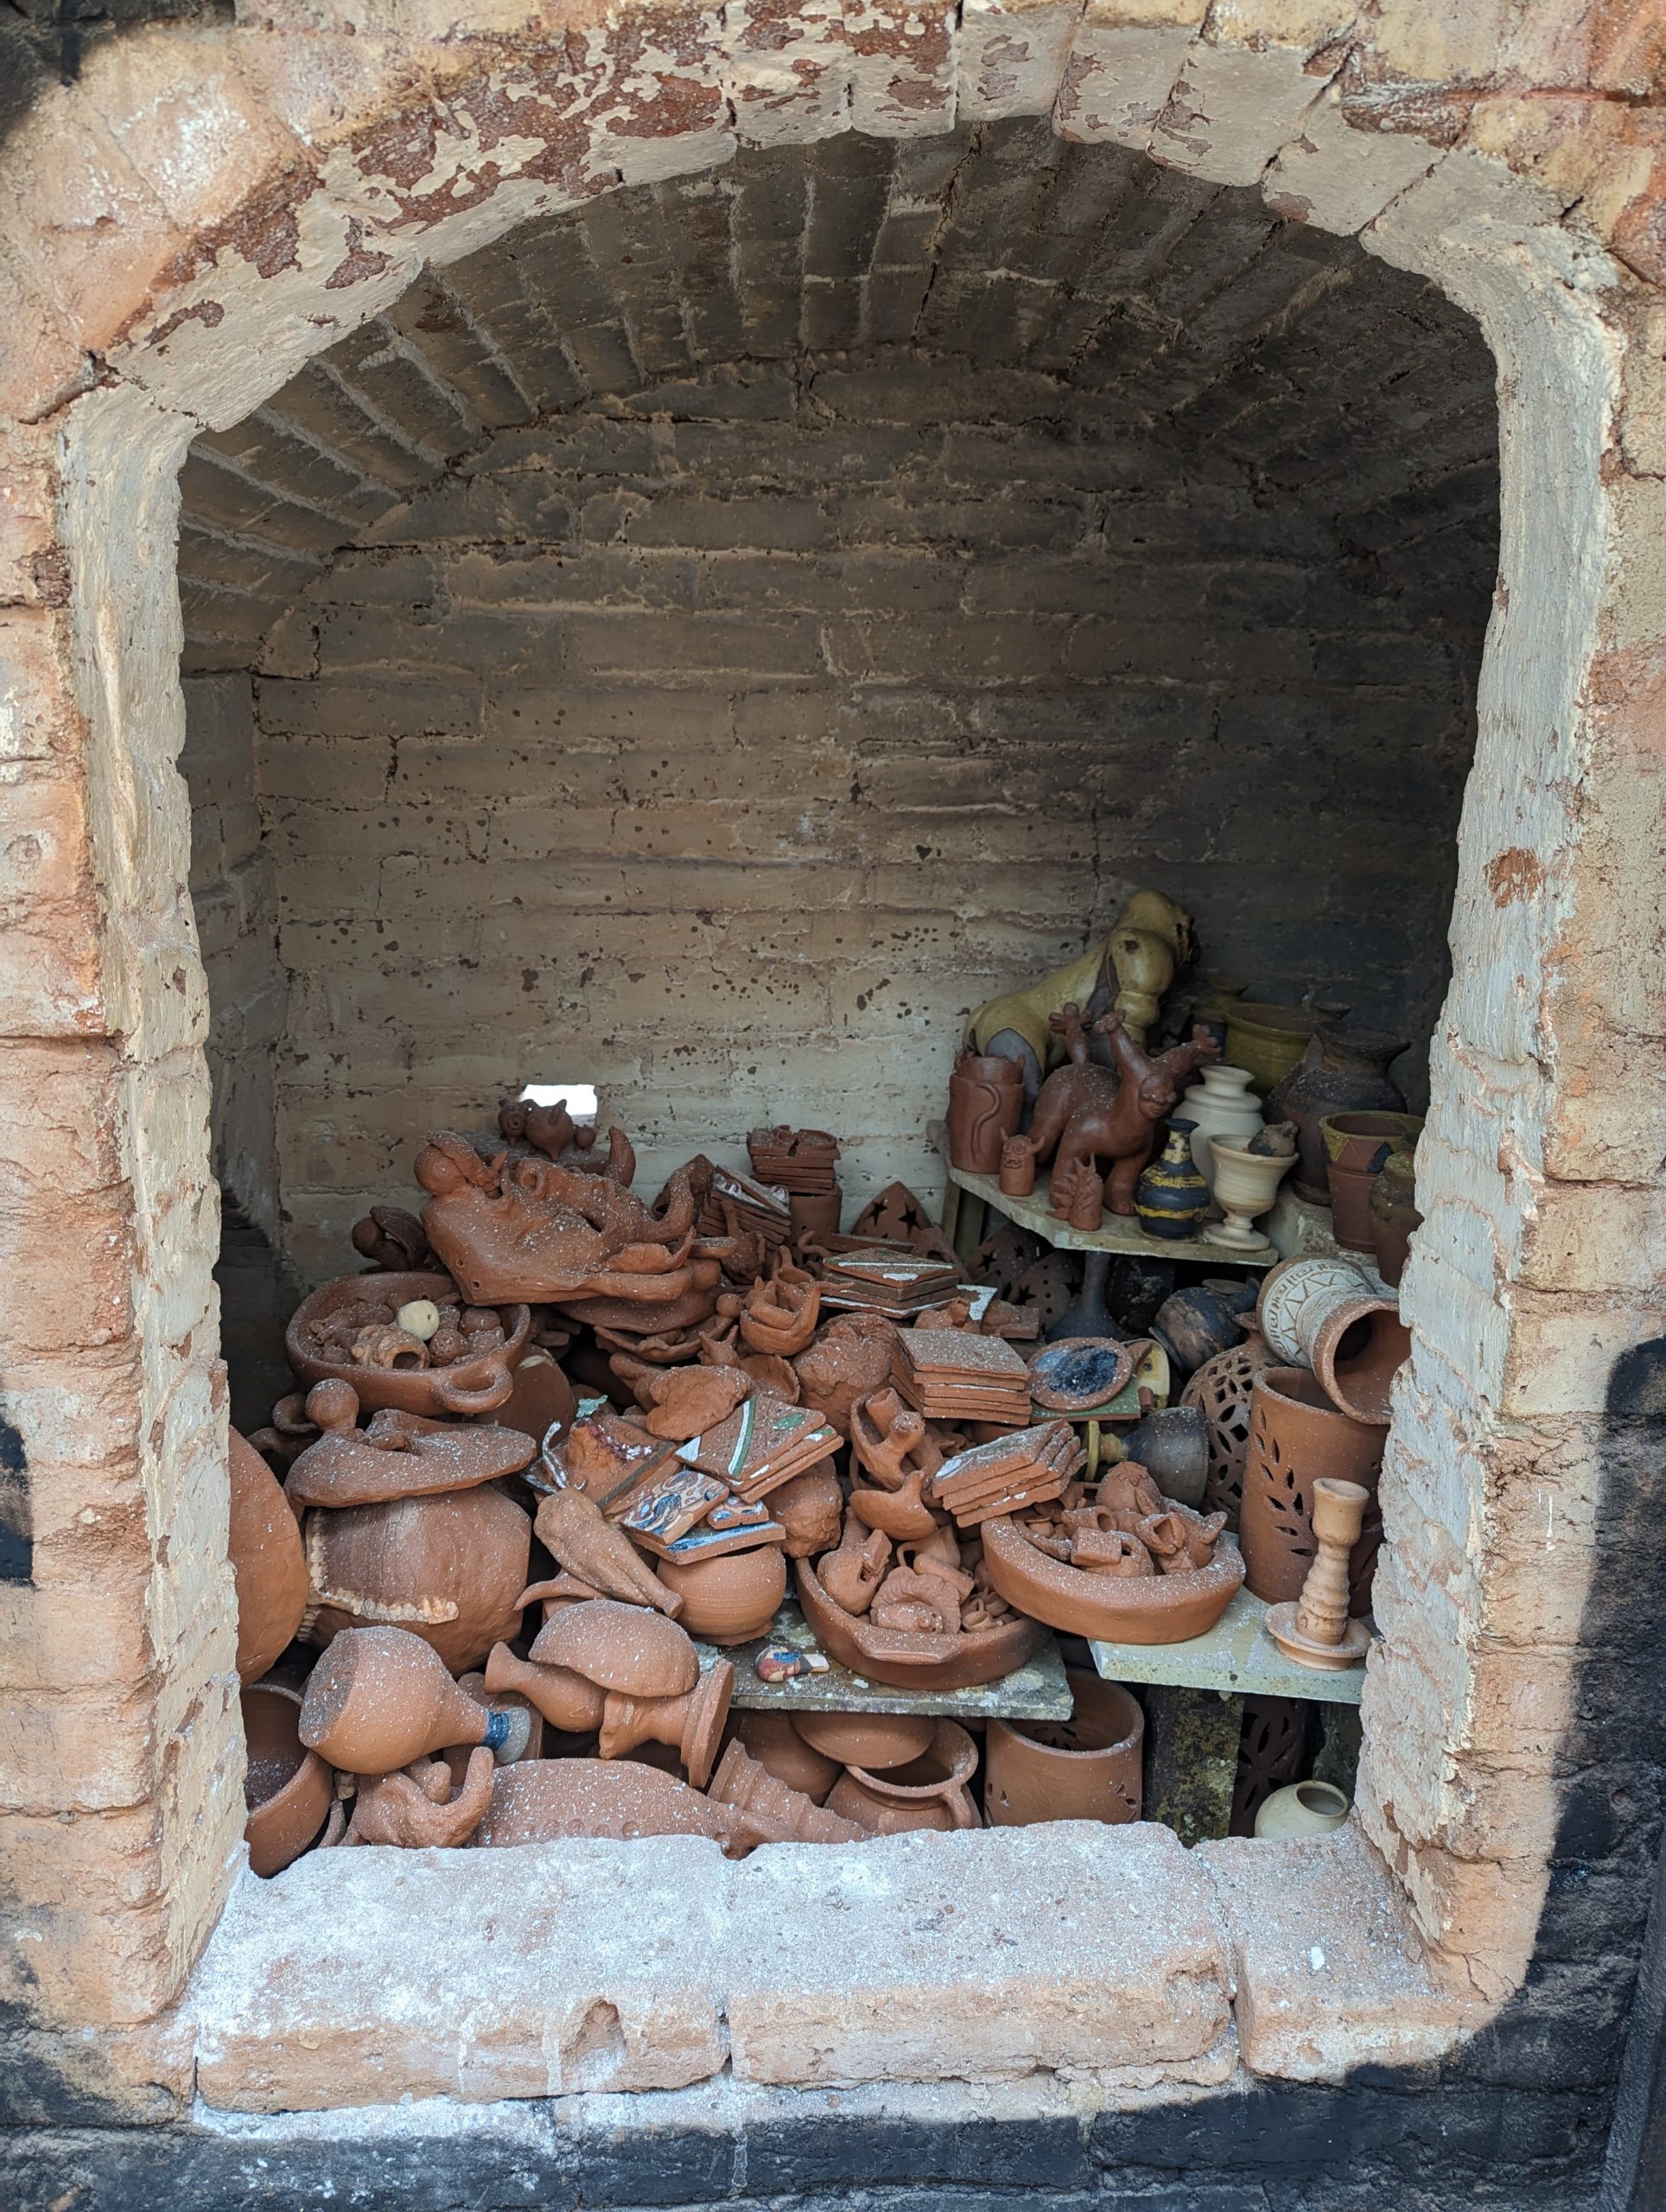 Looking through the open door of a brick kiln, we see ceramic vases, bowls, and dishes piled on top of each other with a thin layer of ash coating everything.